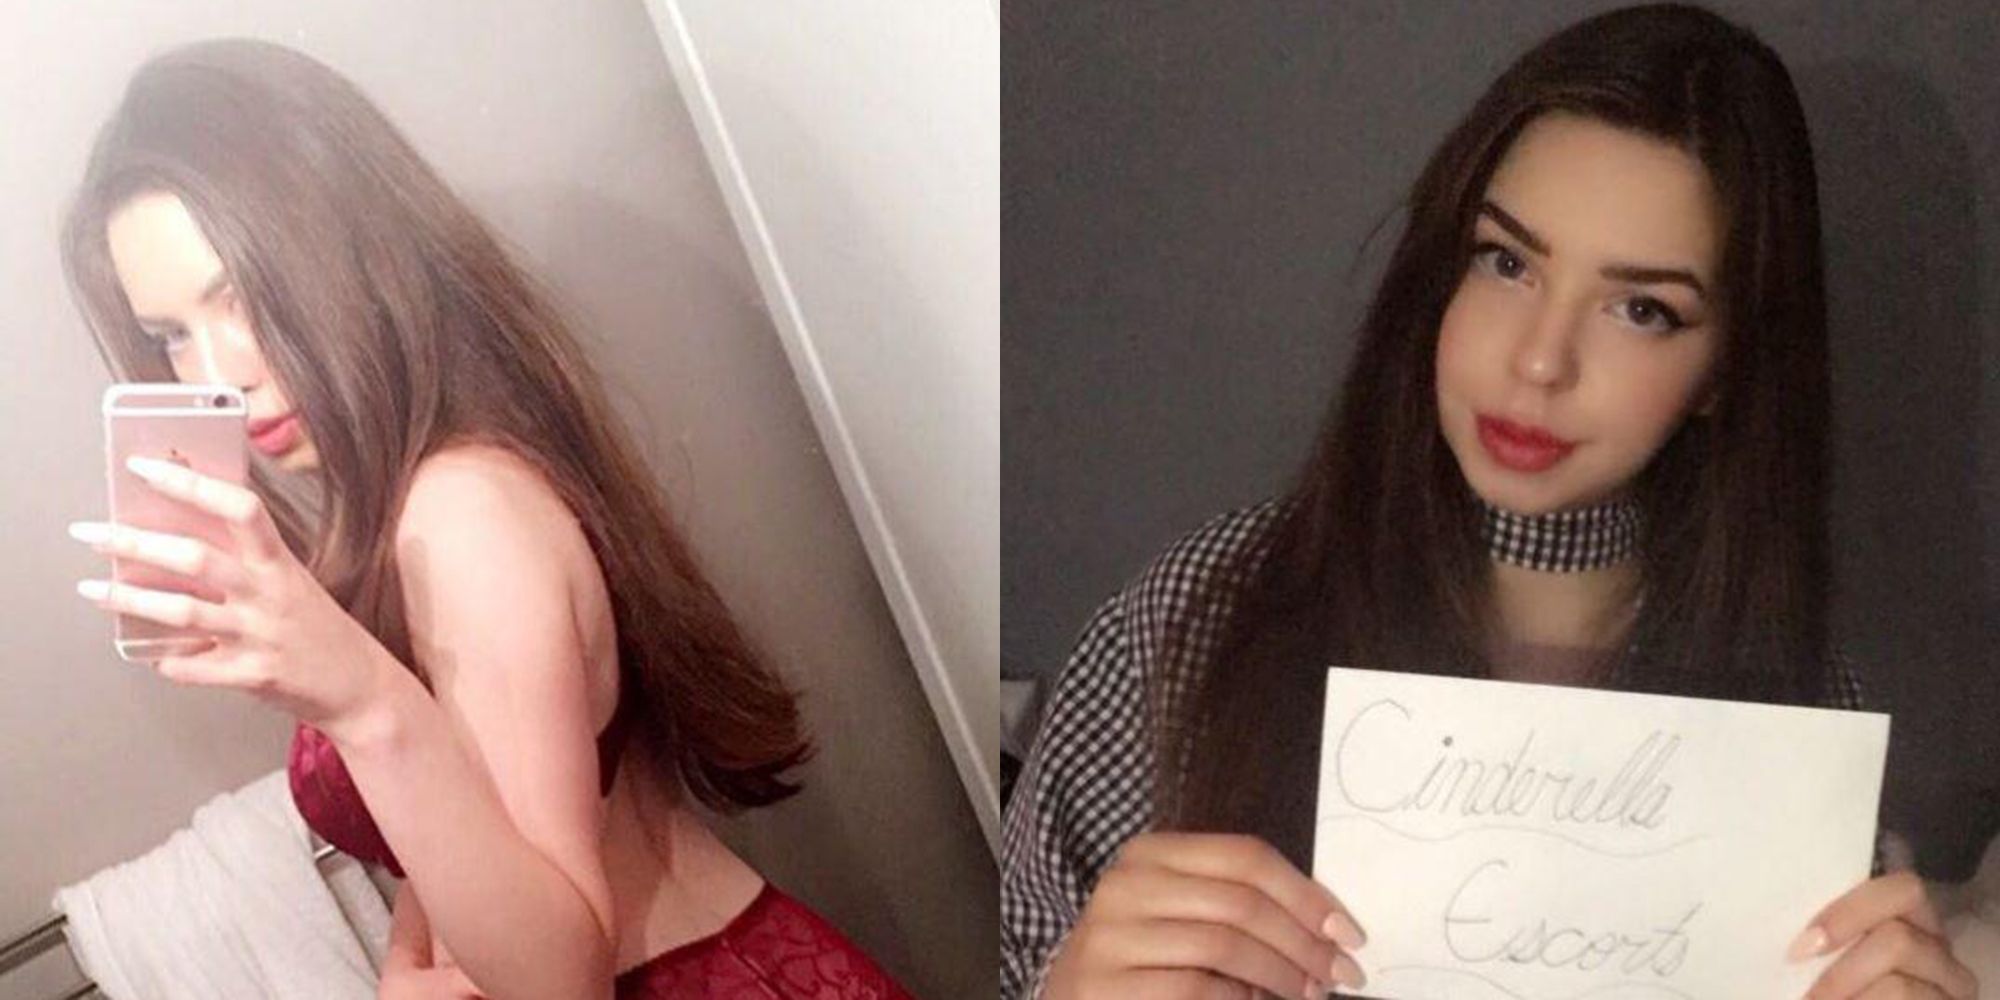 19-year-old girl says her dreams have come true after selling her virginity for £2 million